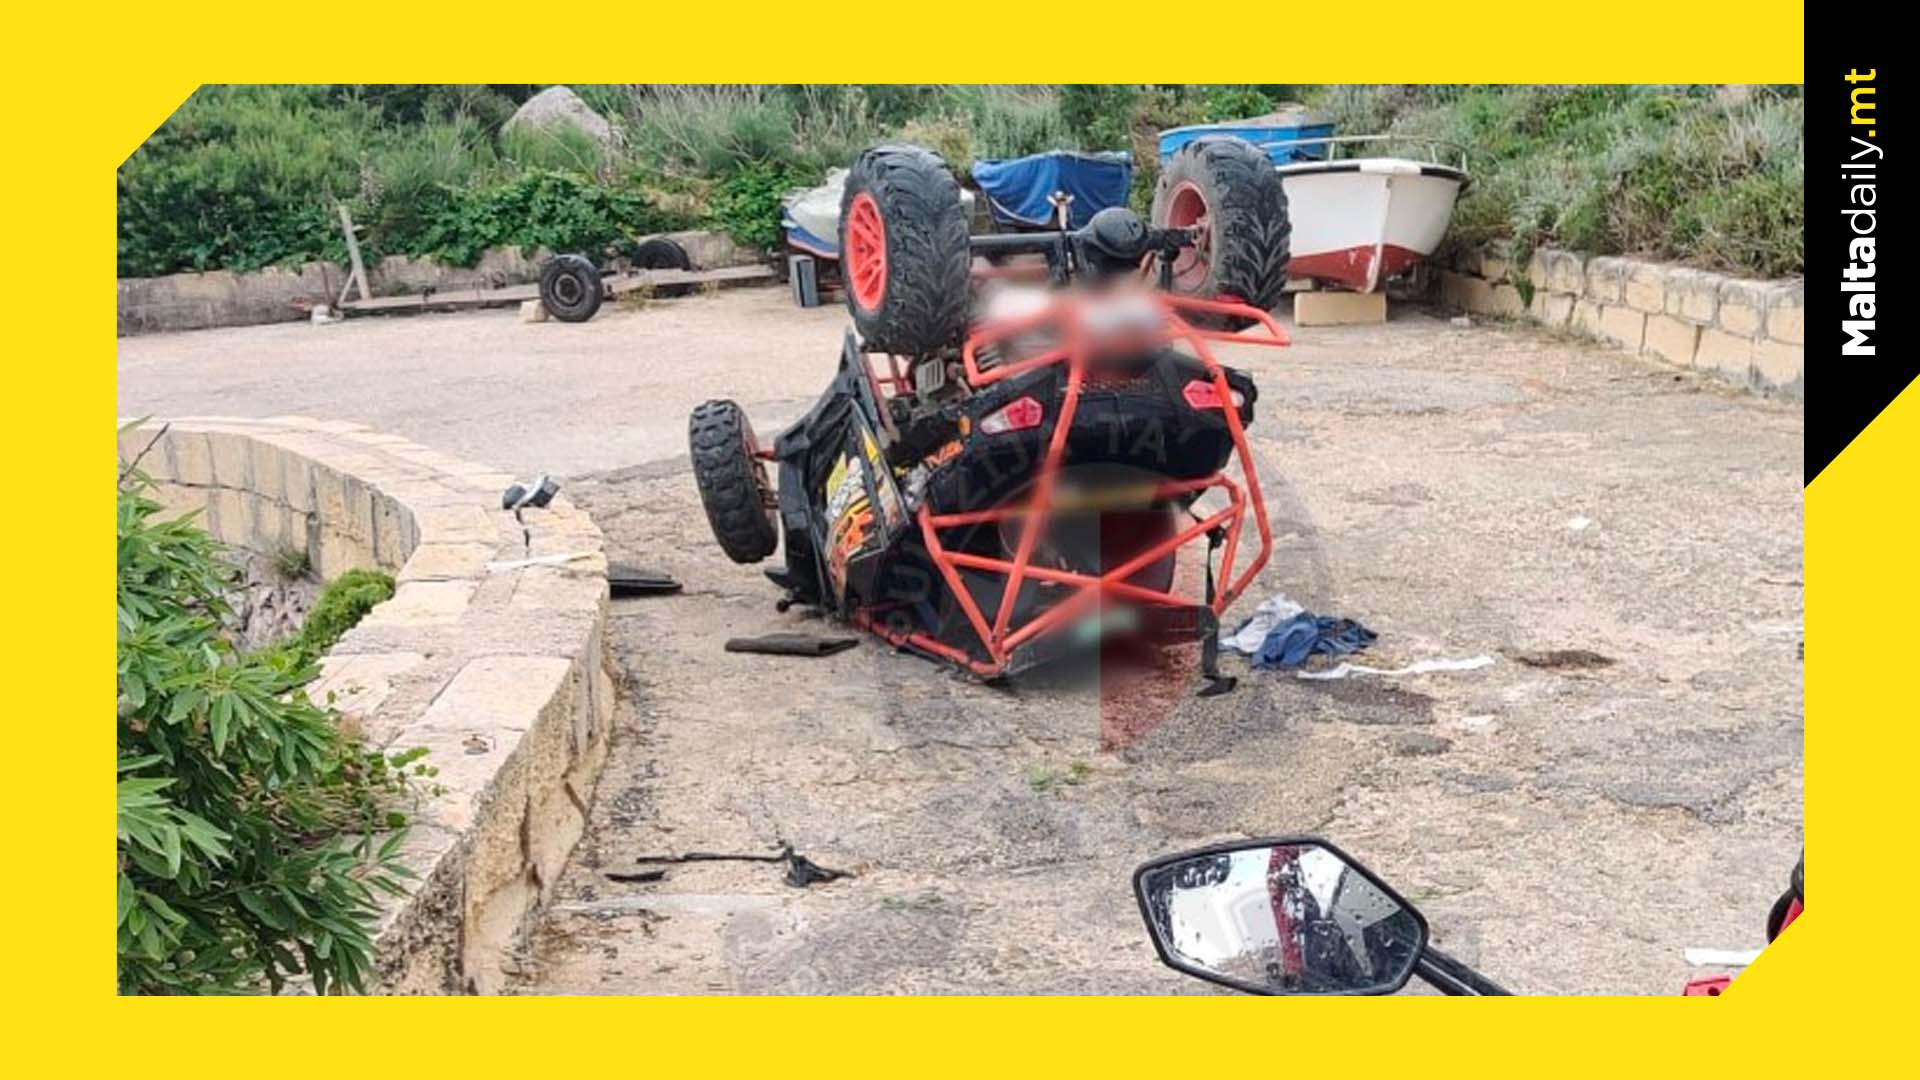 Man grievously injured in Gozo beach buggy incident